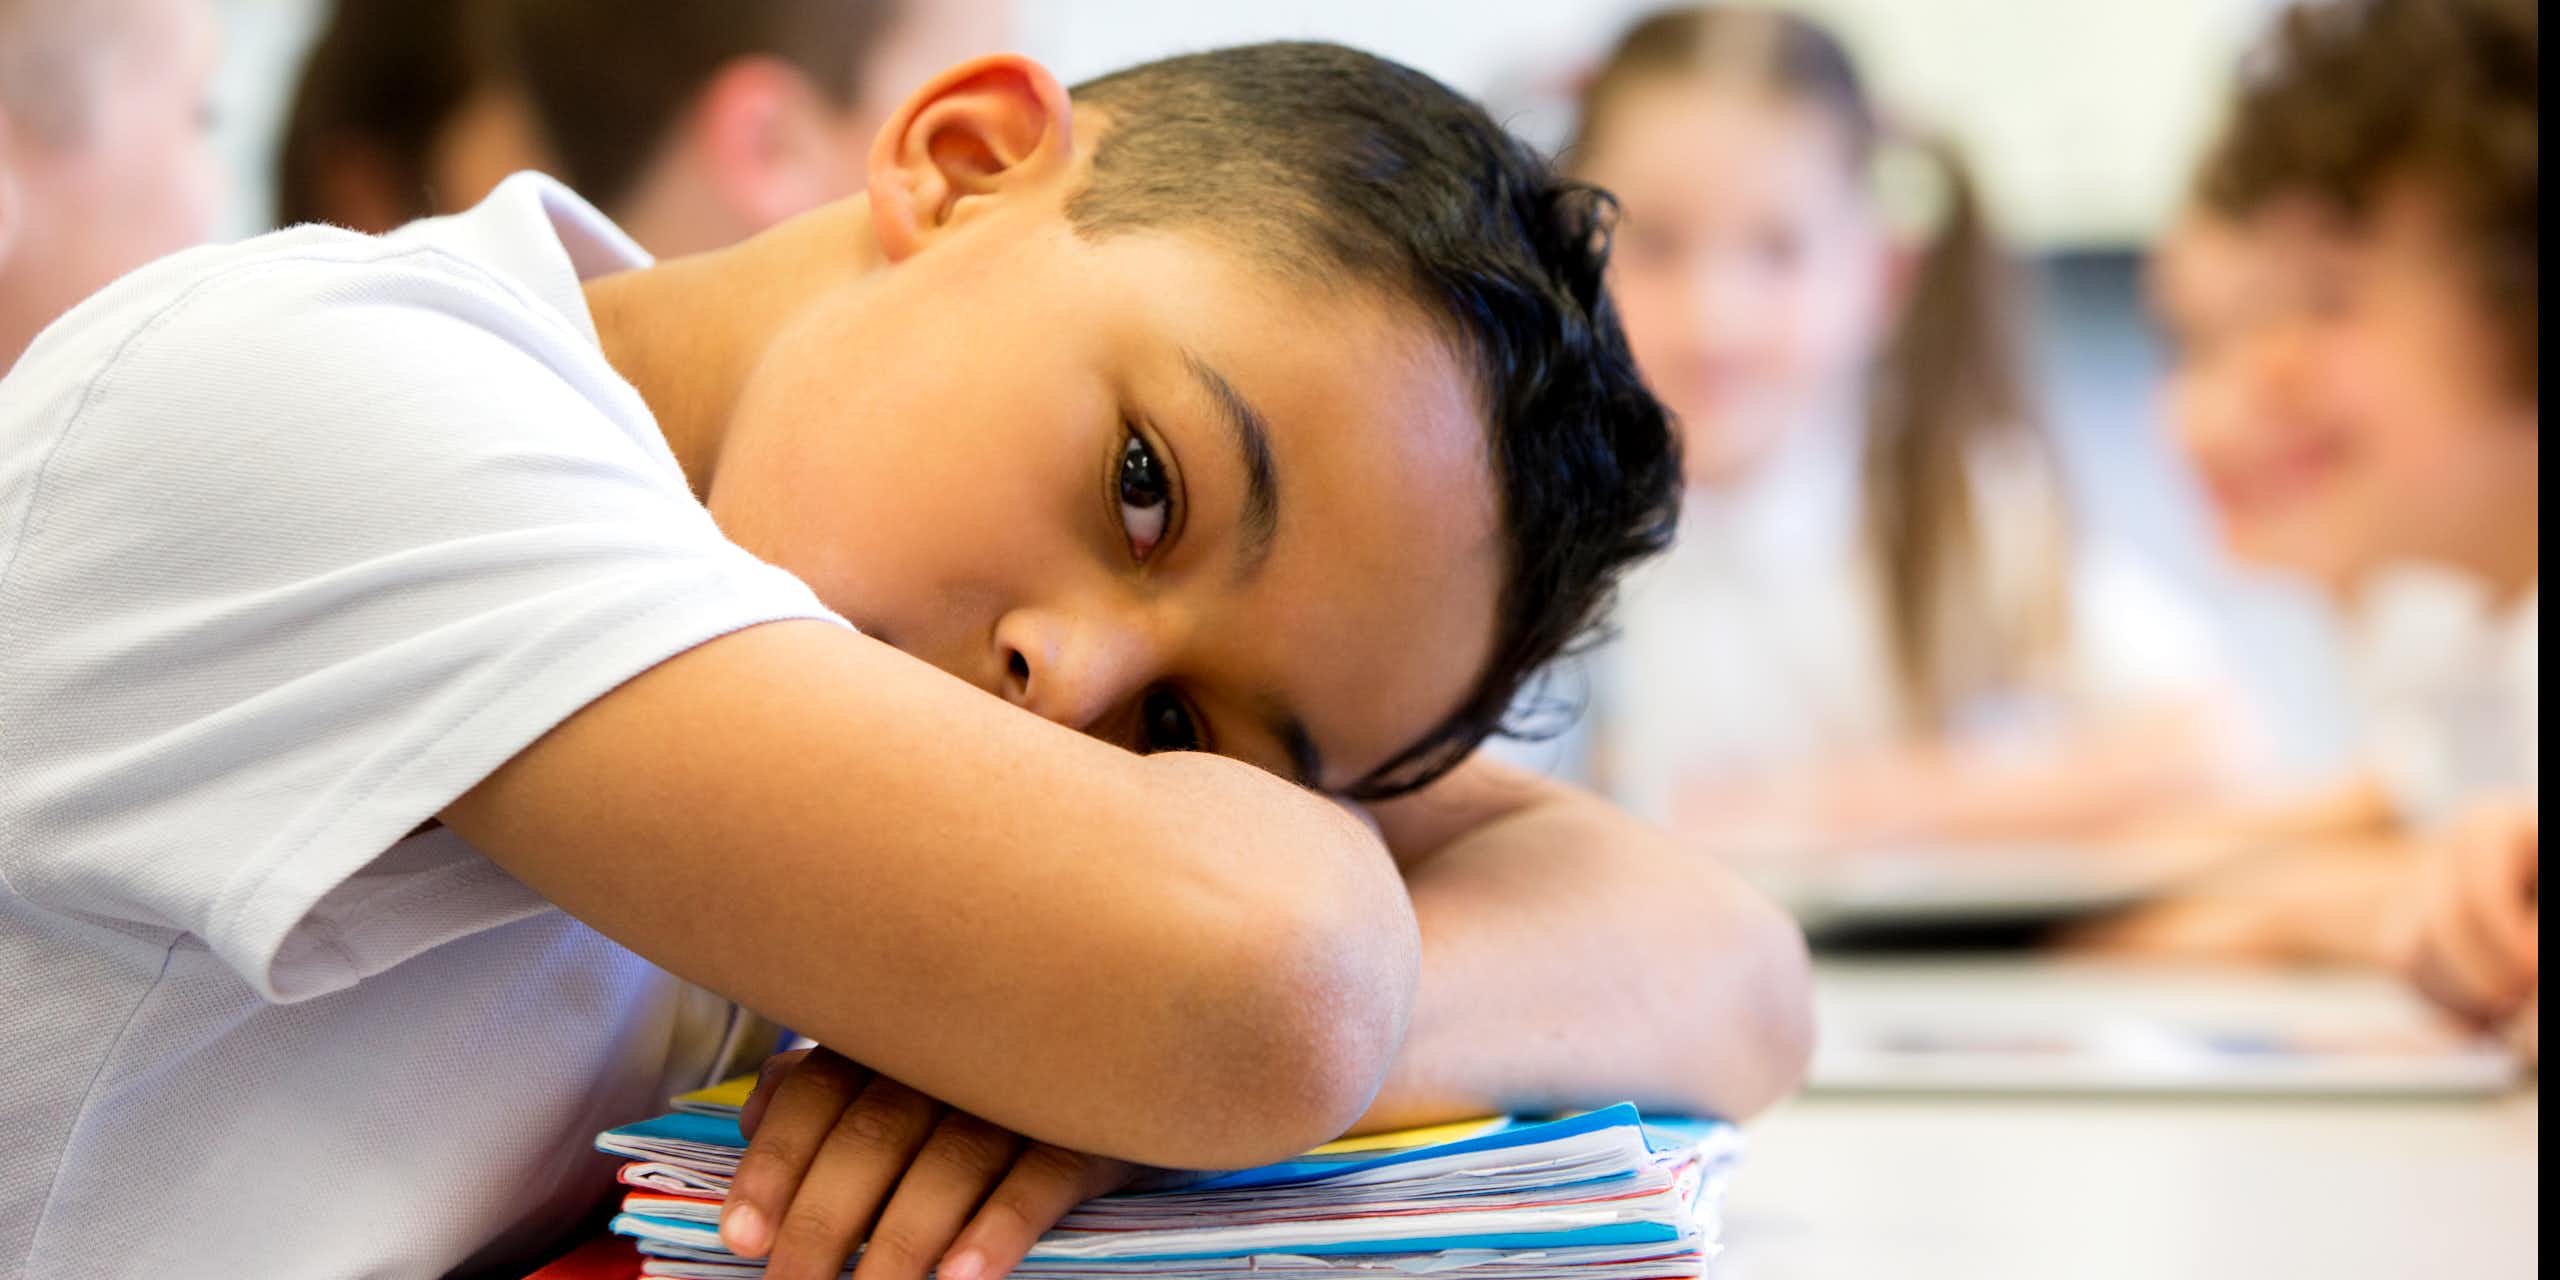 Elementary school-age boy rests head on crossed arms on desk with other kids in background